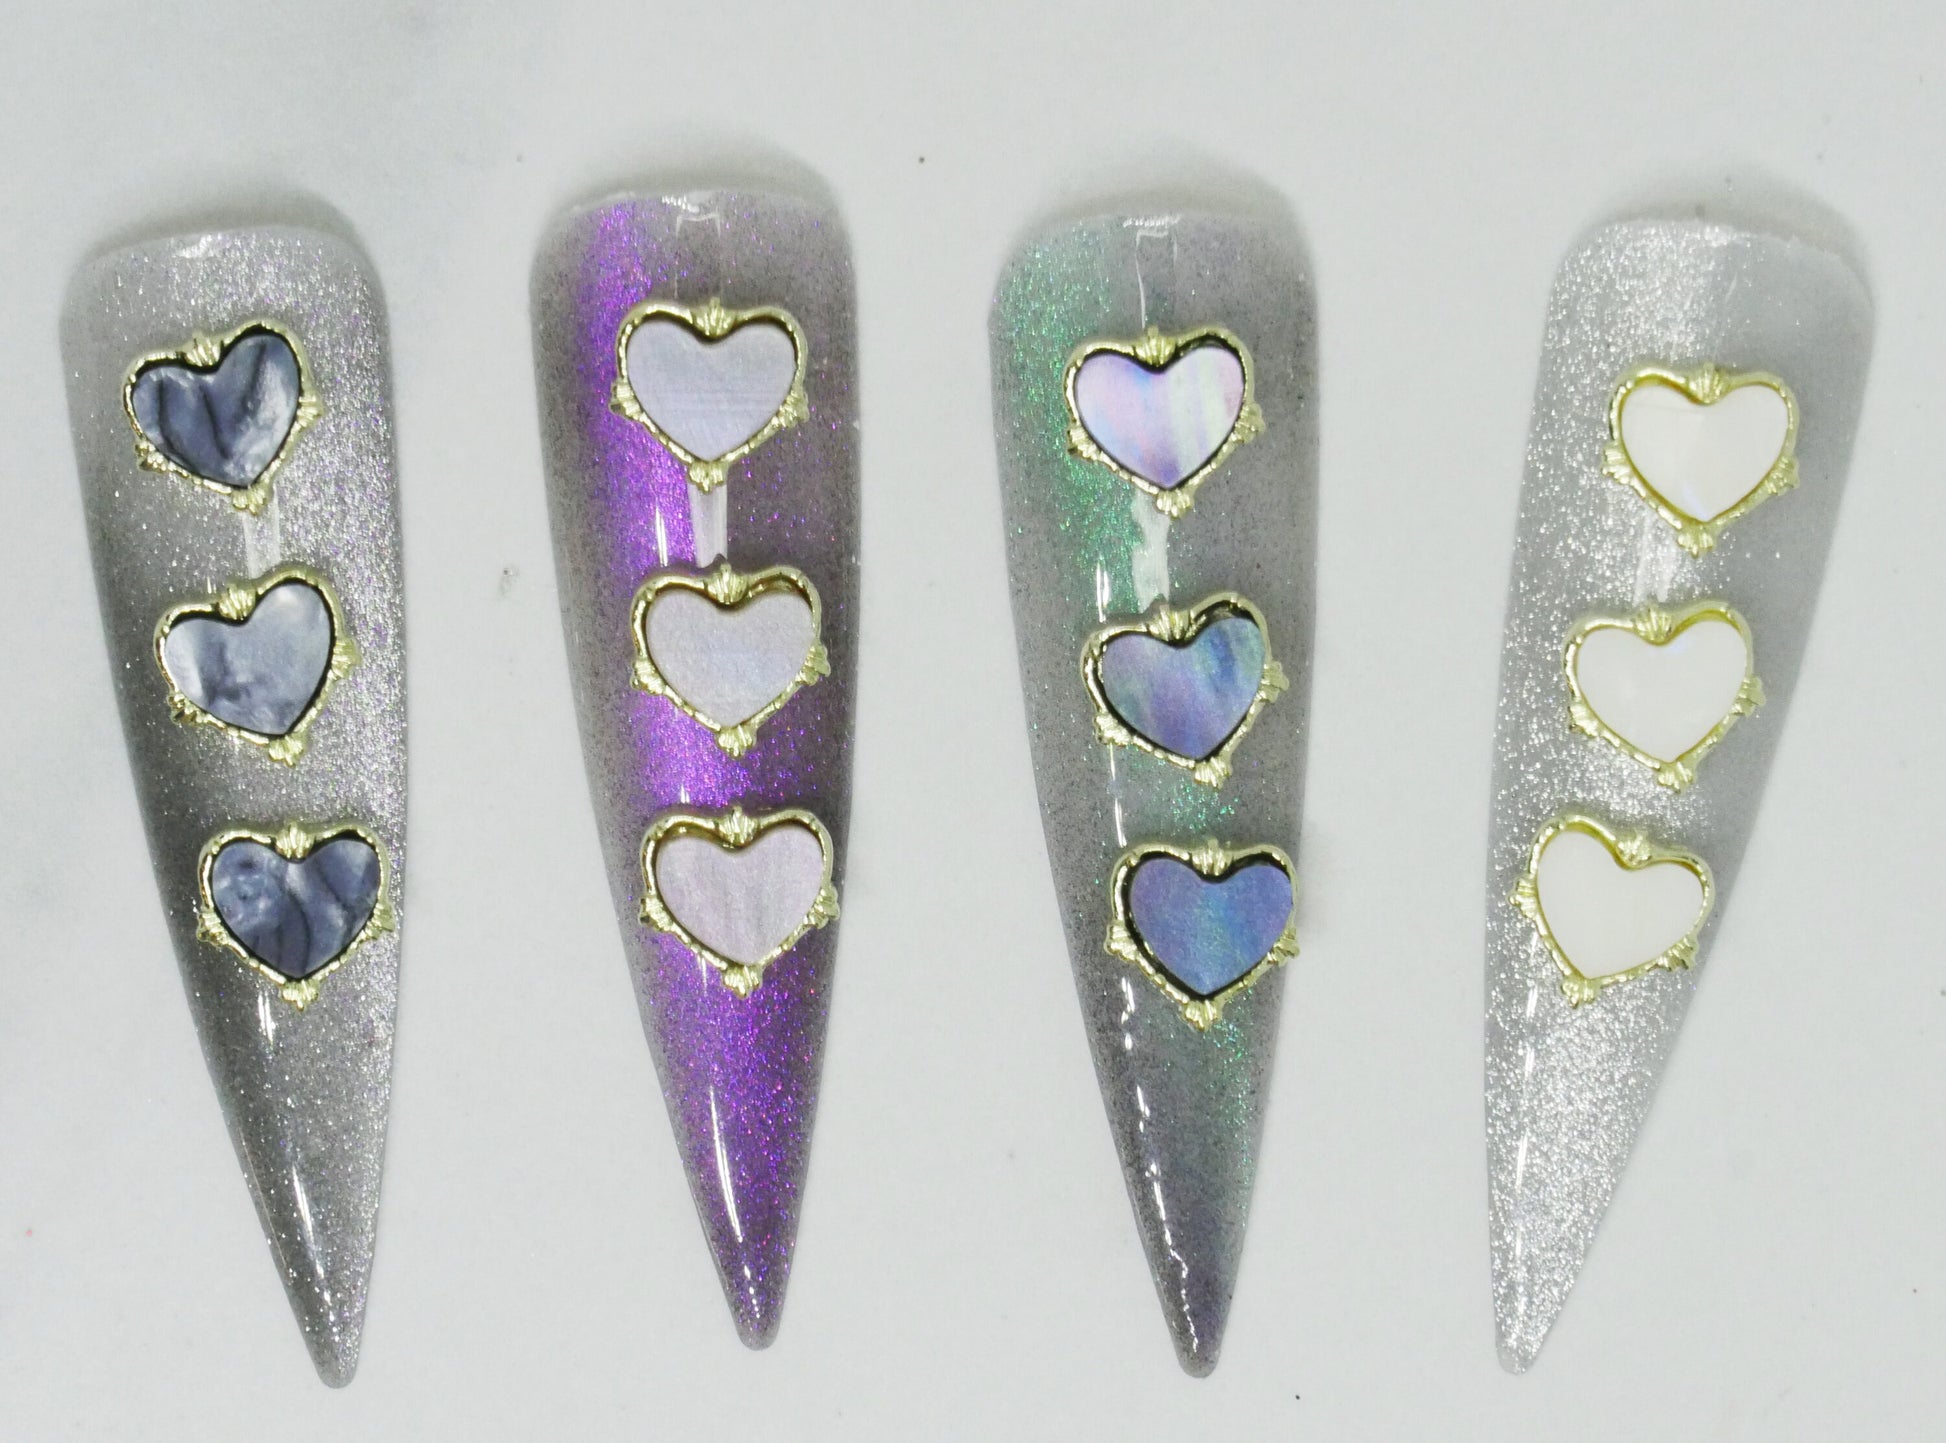 45pcs Heart Shaped Nail Charms Nails art Charms Accessories Decal